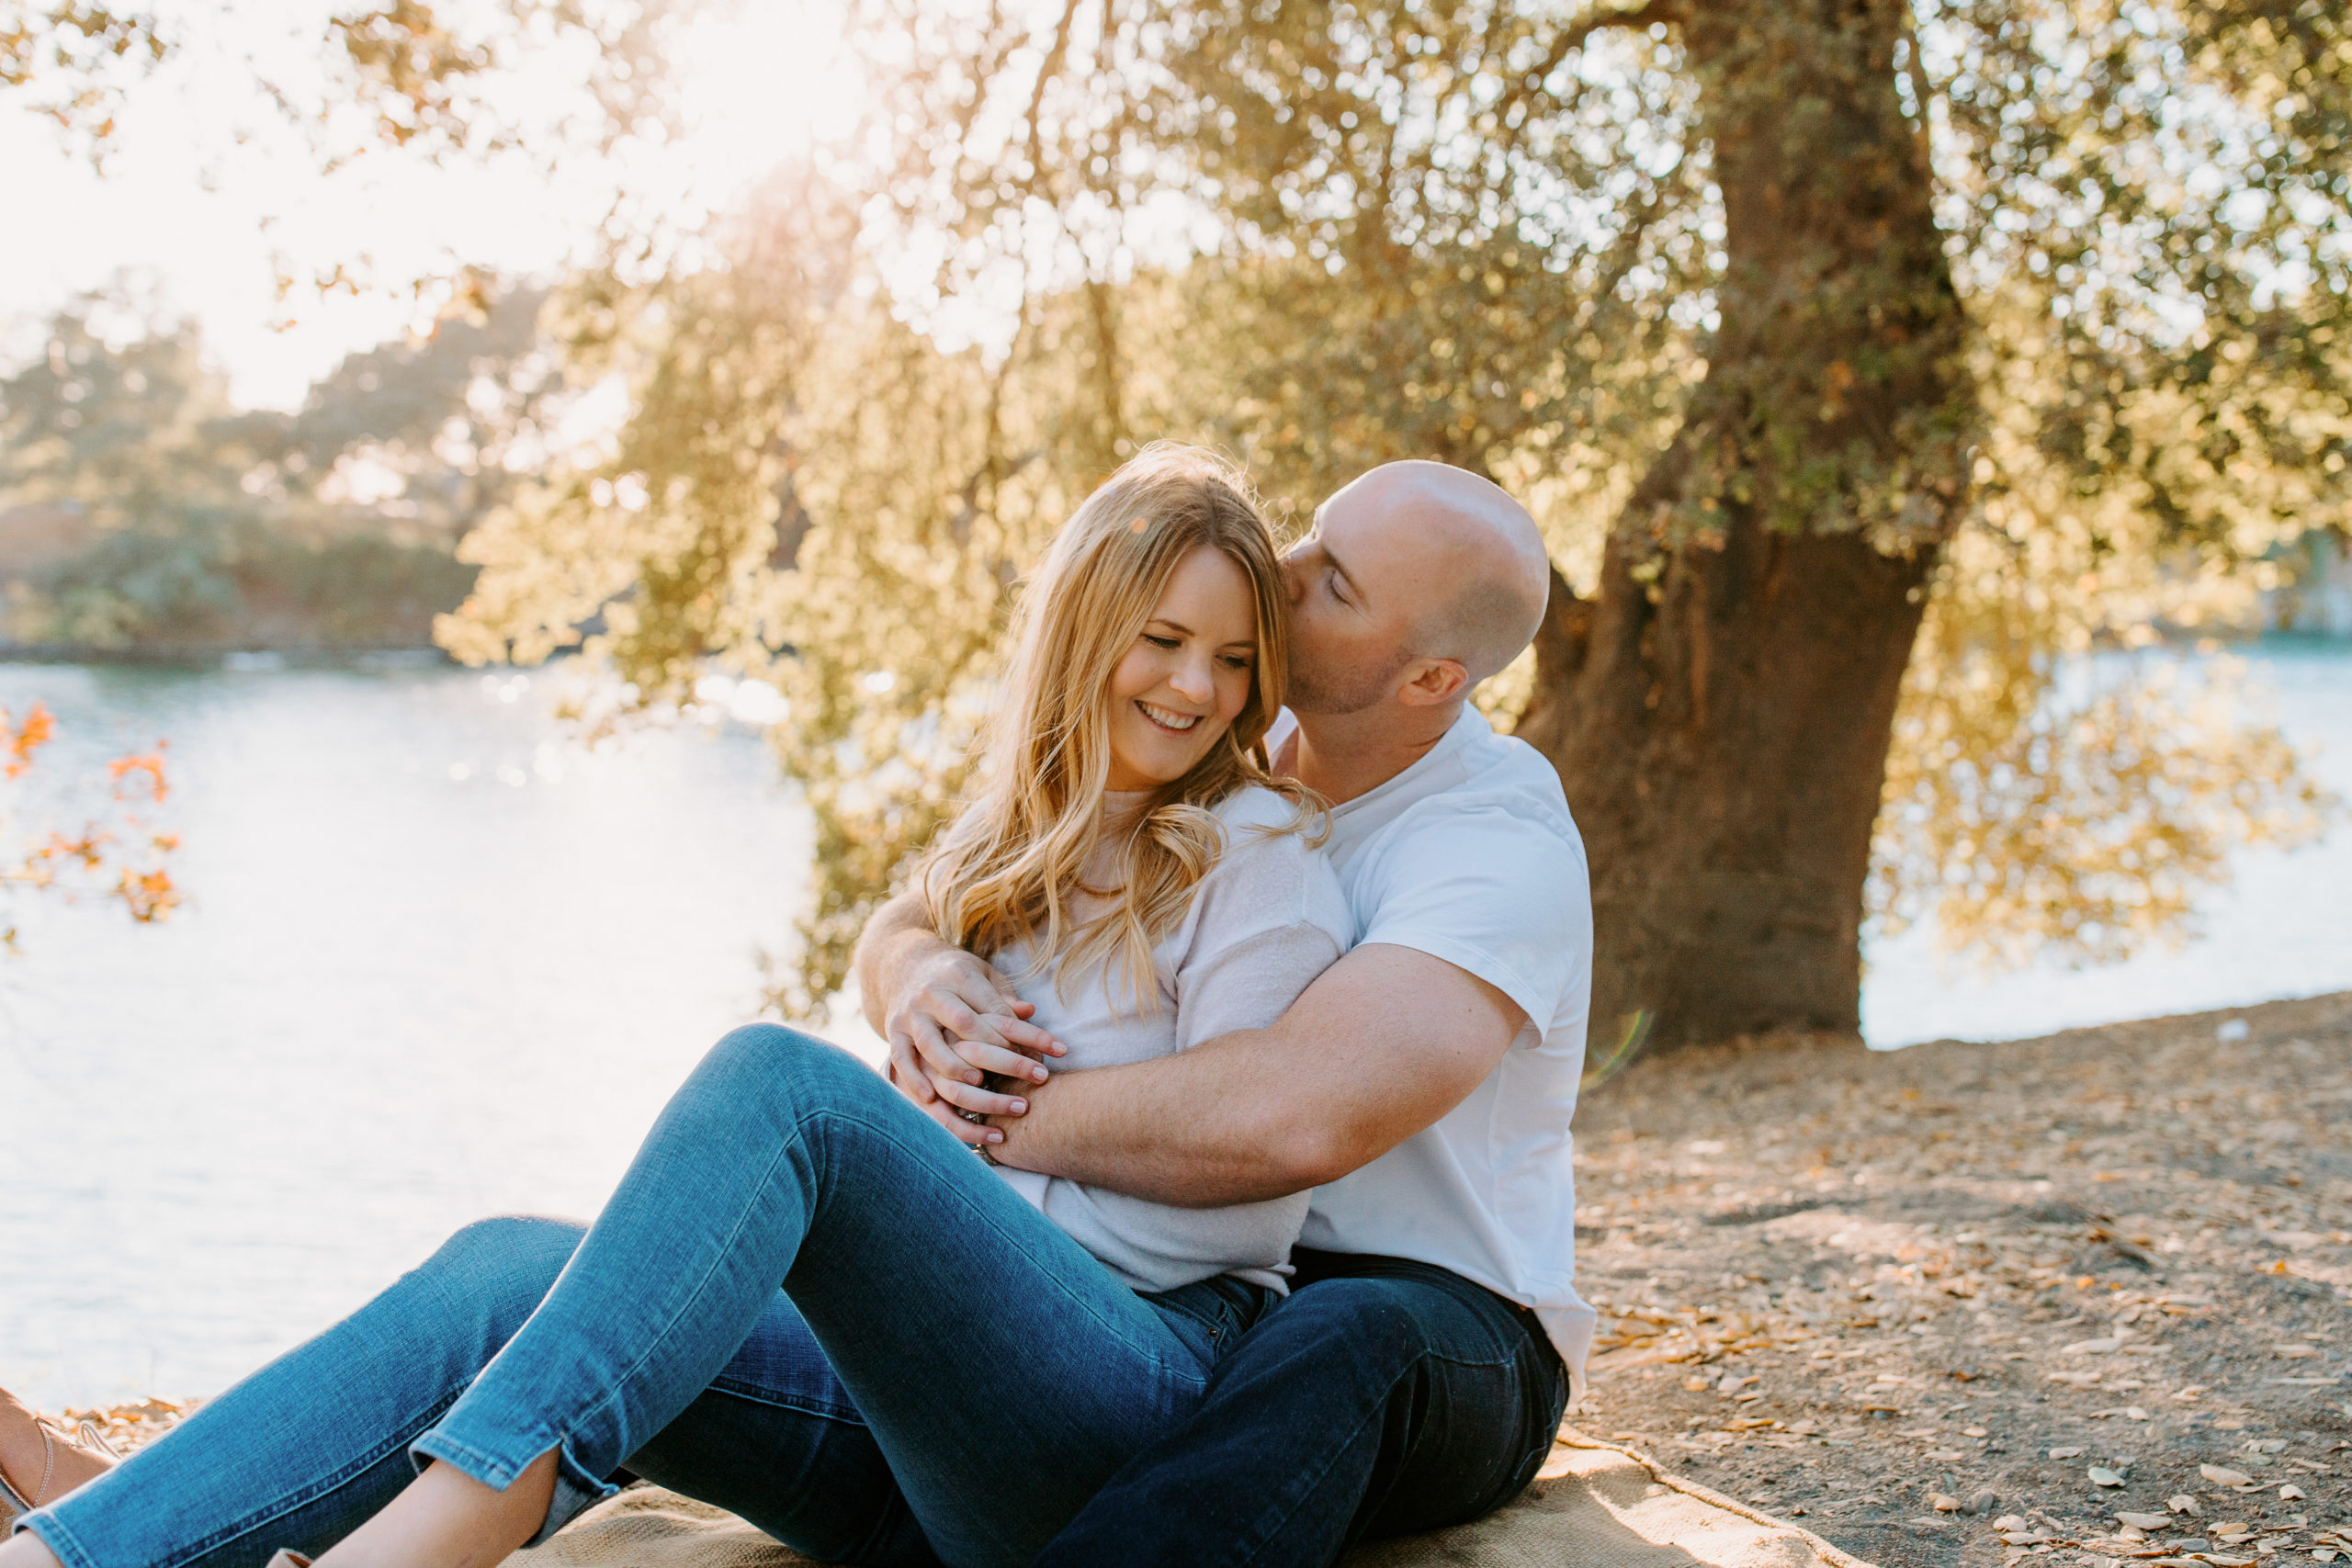 couple sitting under tree in front of river, Sacramento engagement photos, sacramento engagement, sacramento engagement photographer sacramento engagement photo locations, sacramento wedding photographer, rachel christopherson photography, engagement photo outfit inspo